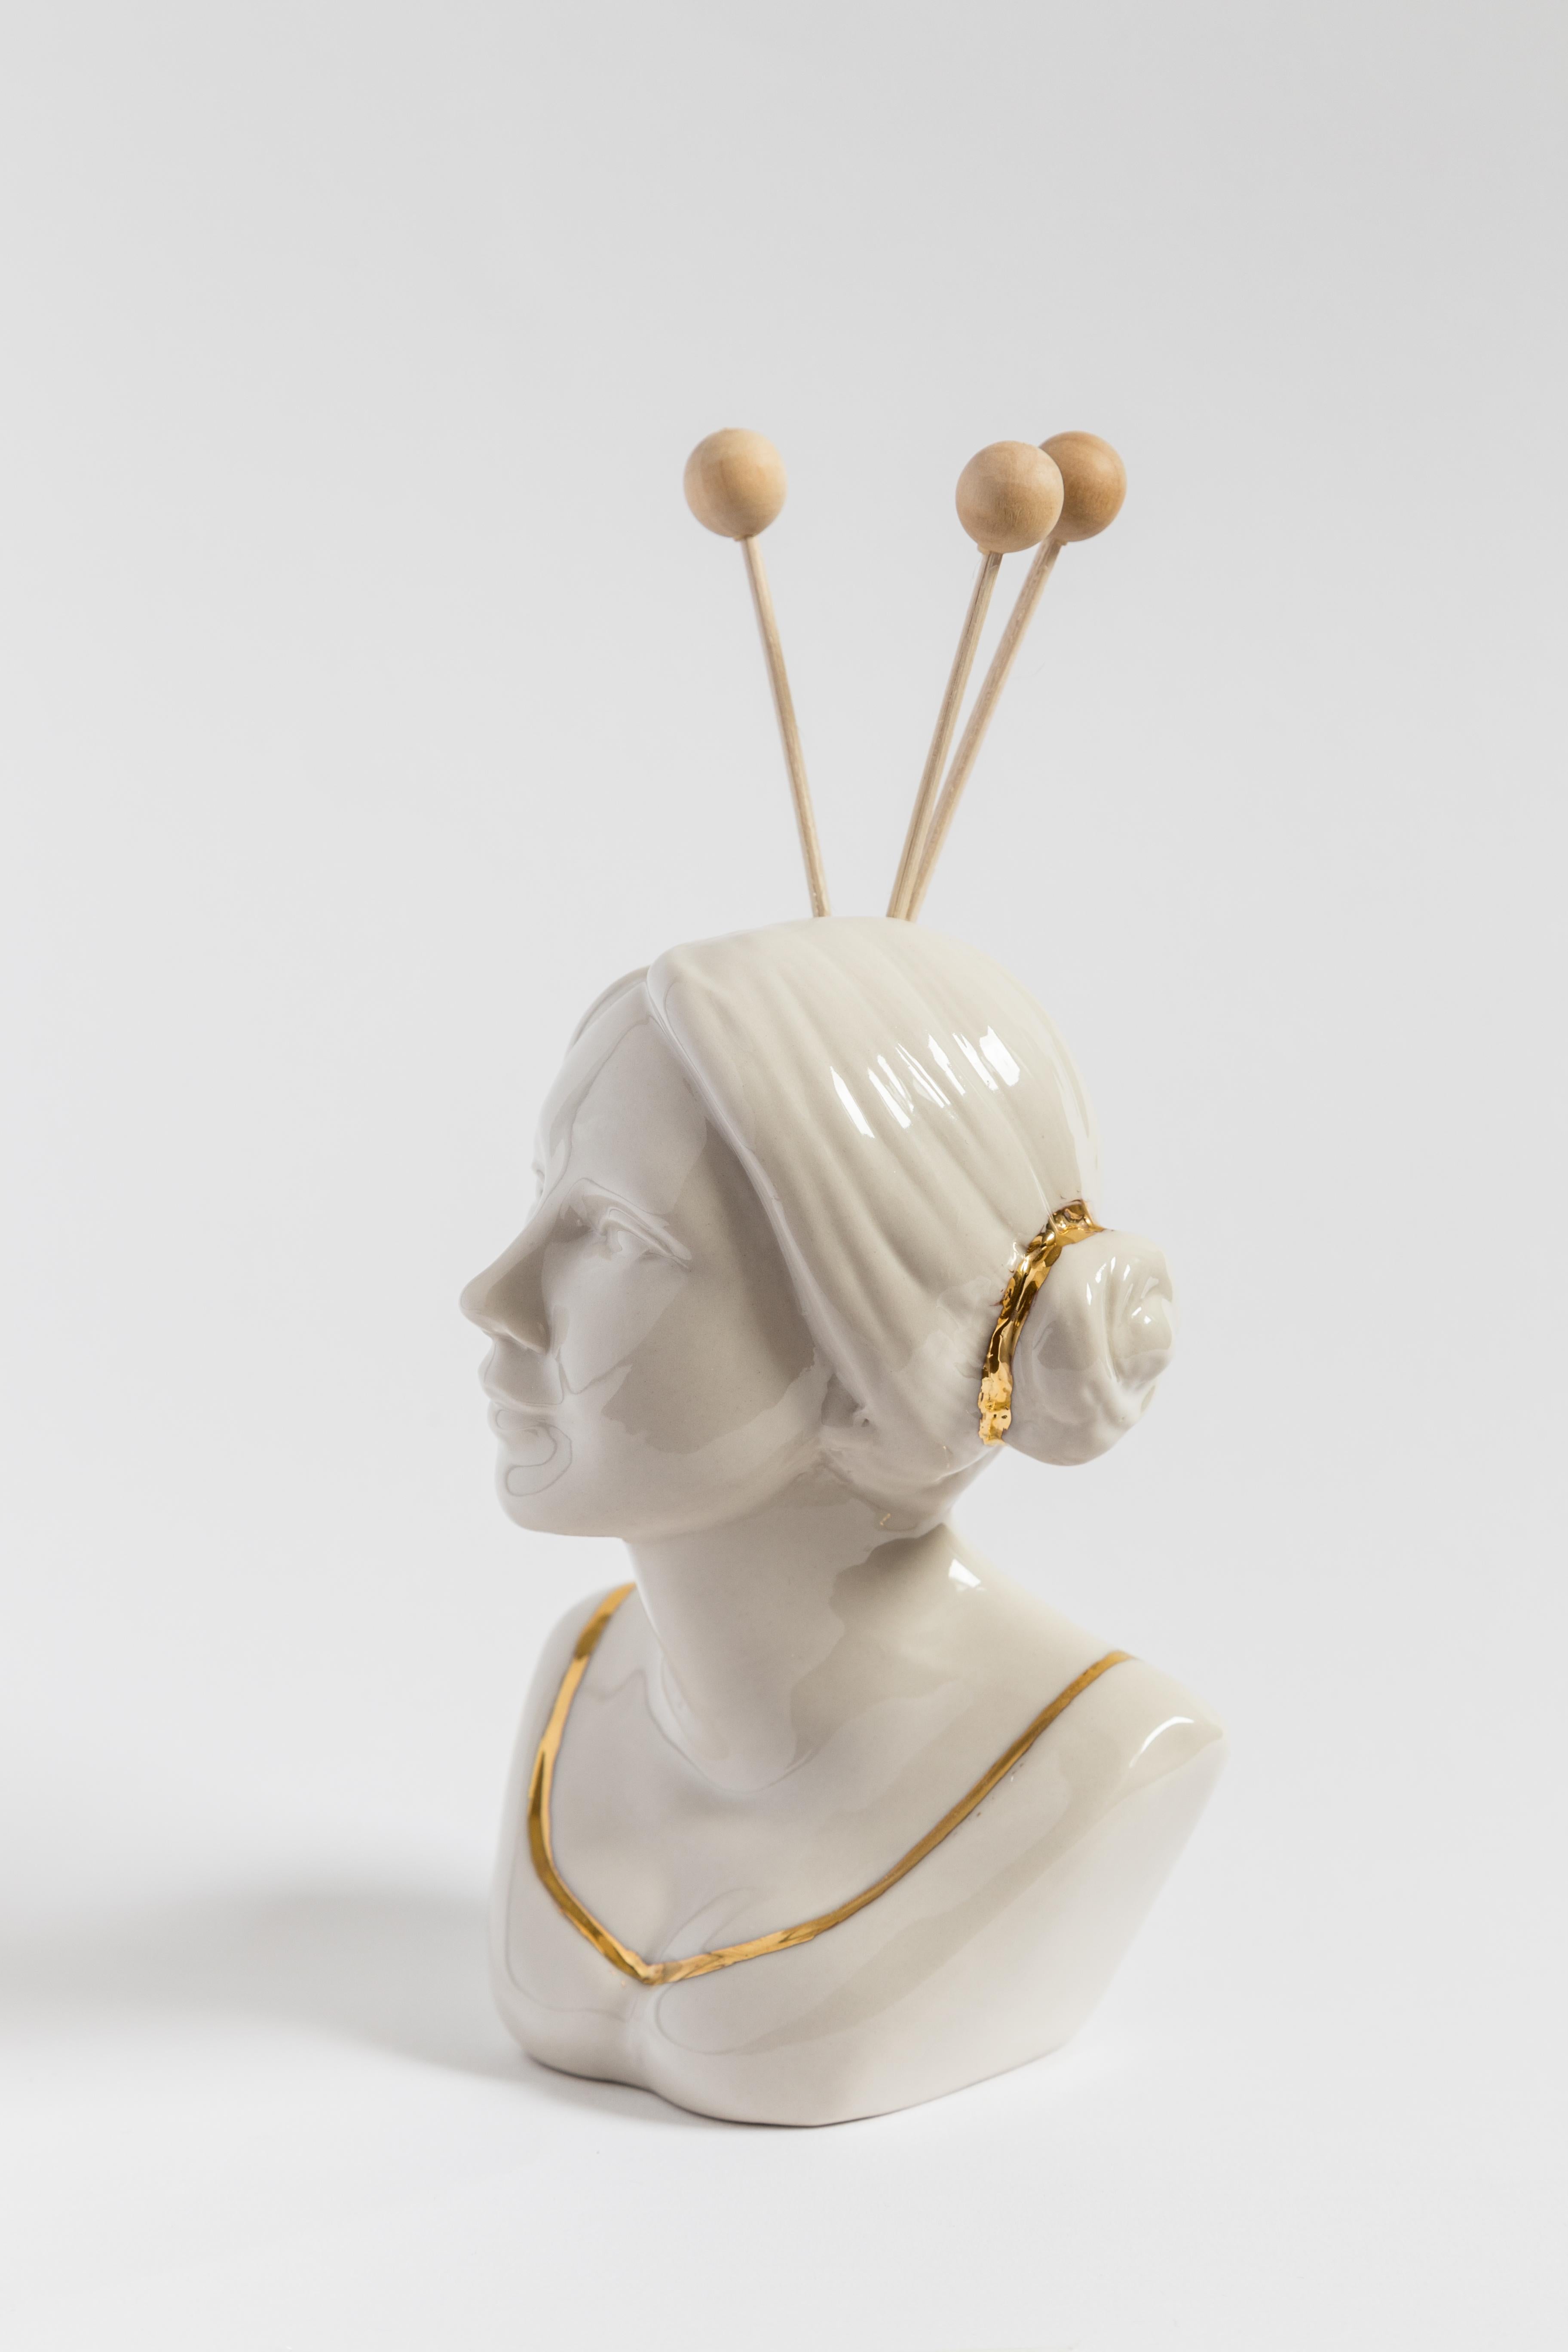 This Italian porcelain sculpture is part of Grand Tour by Vito Nesta. Made in Capodimonte porcelain with a glossy finish and gold detail, this sculpture is an essential oil diffuser and is shaped like a Spanish woman.